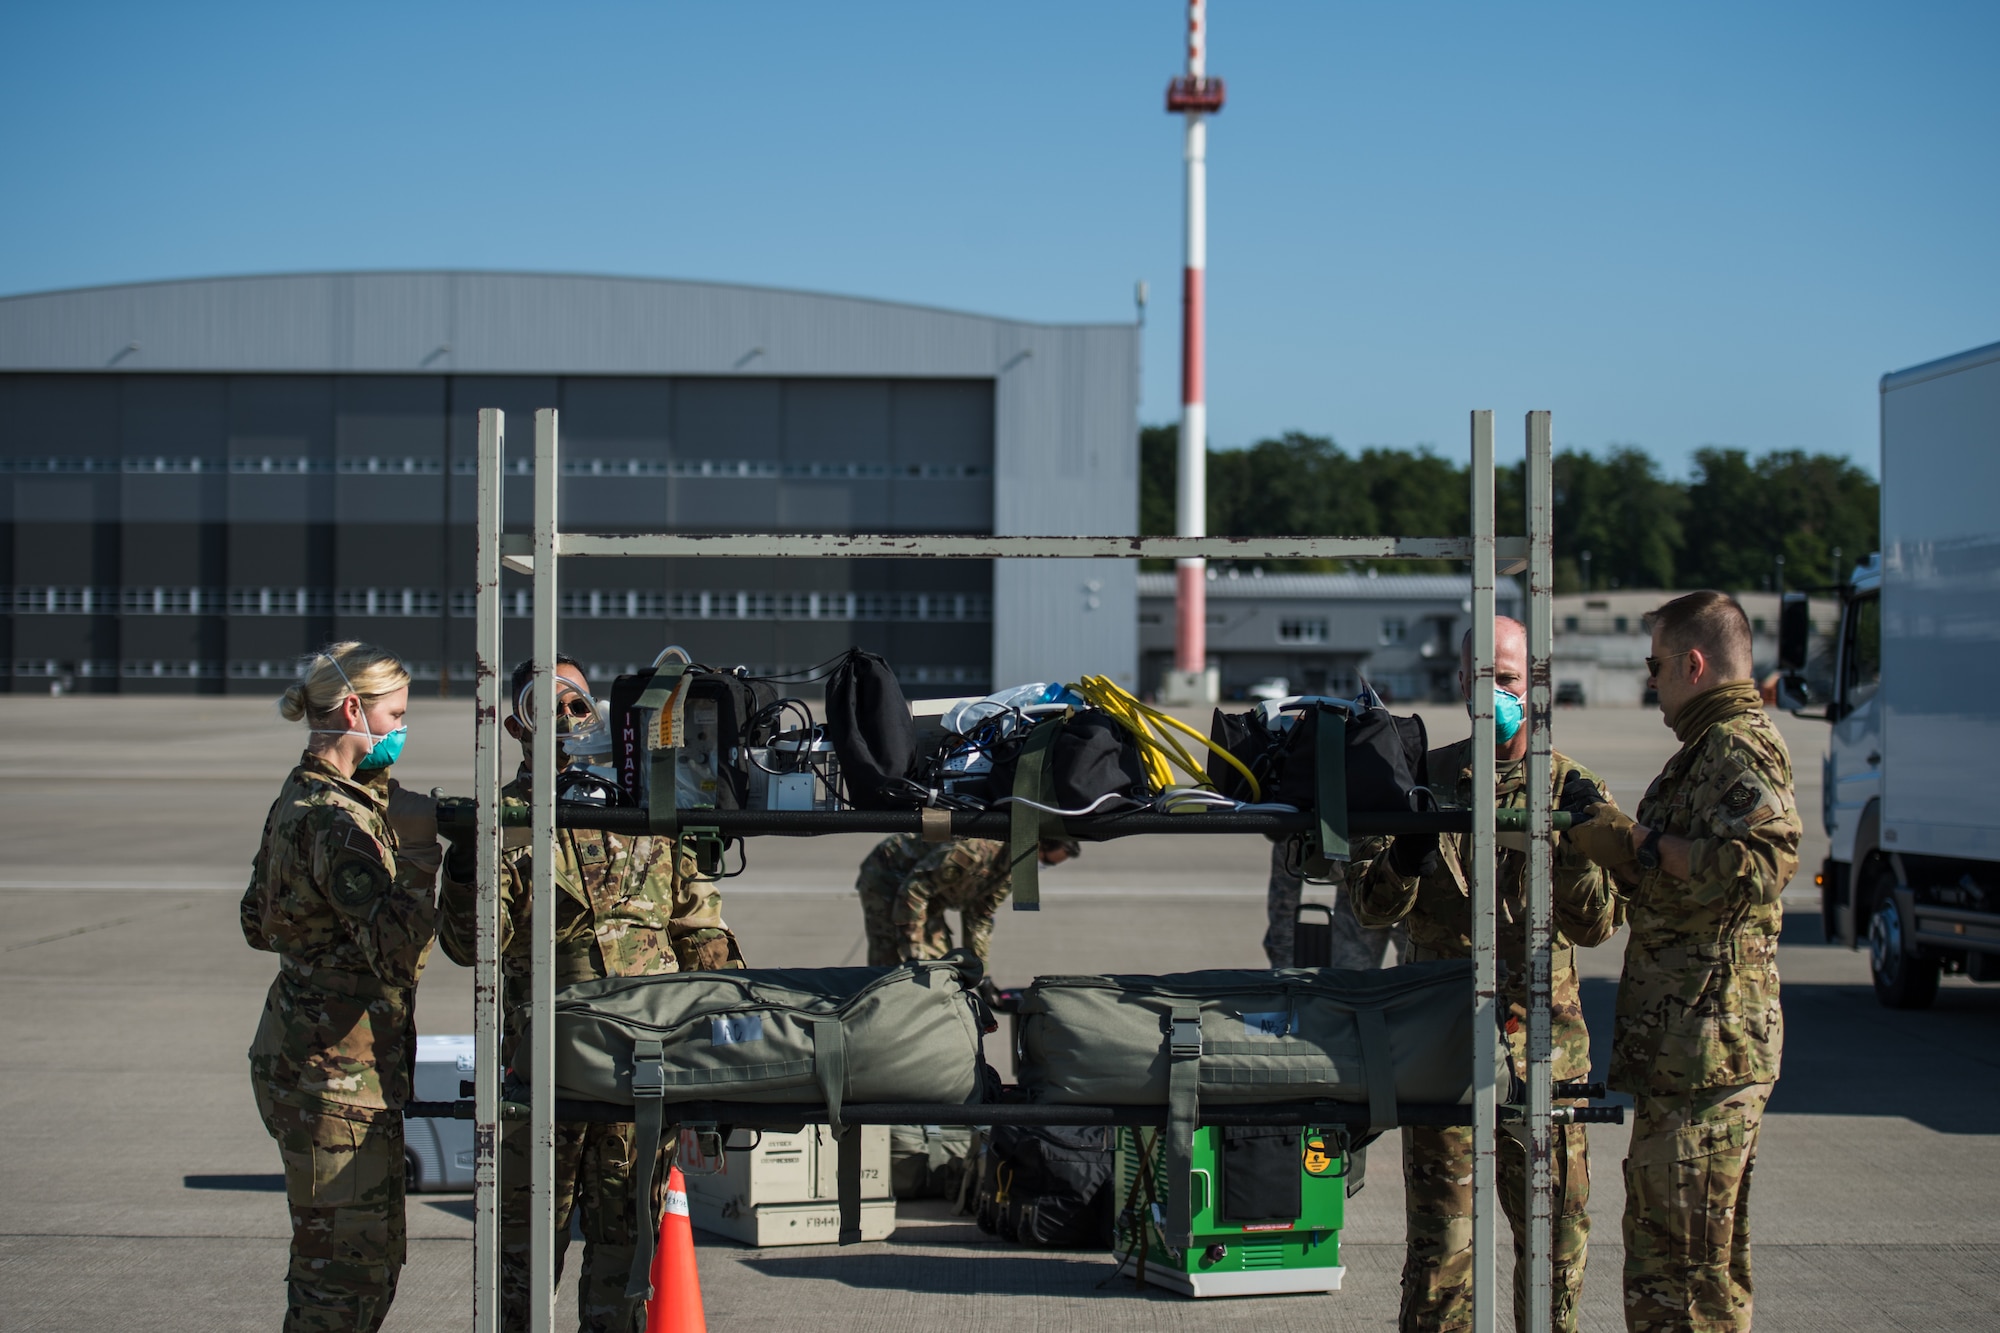 U.S. Airmen assigned to the 313th Expeditionary Operations Support Squadron load their medical supplies to return to their squadron after successfully transferring COVID-19 patients to Ramstein Air Base, Germany, May 16, 2020.